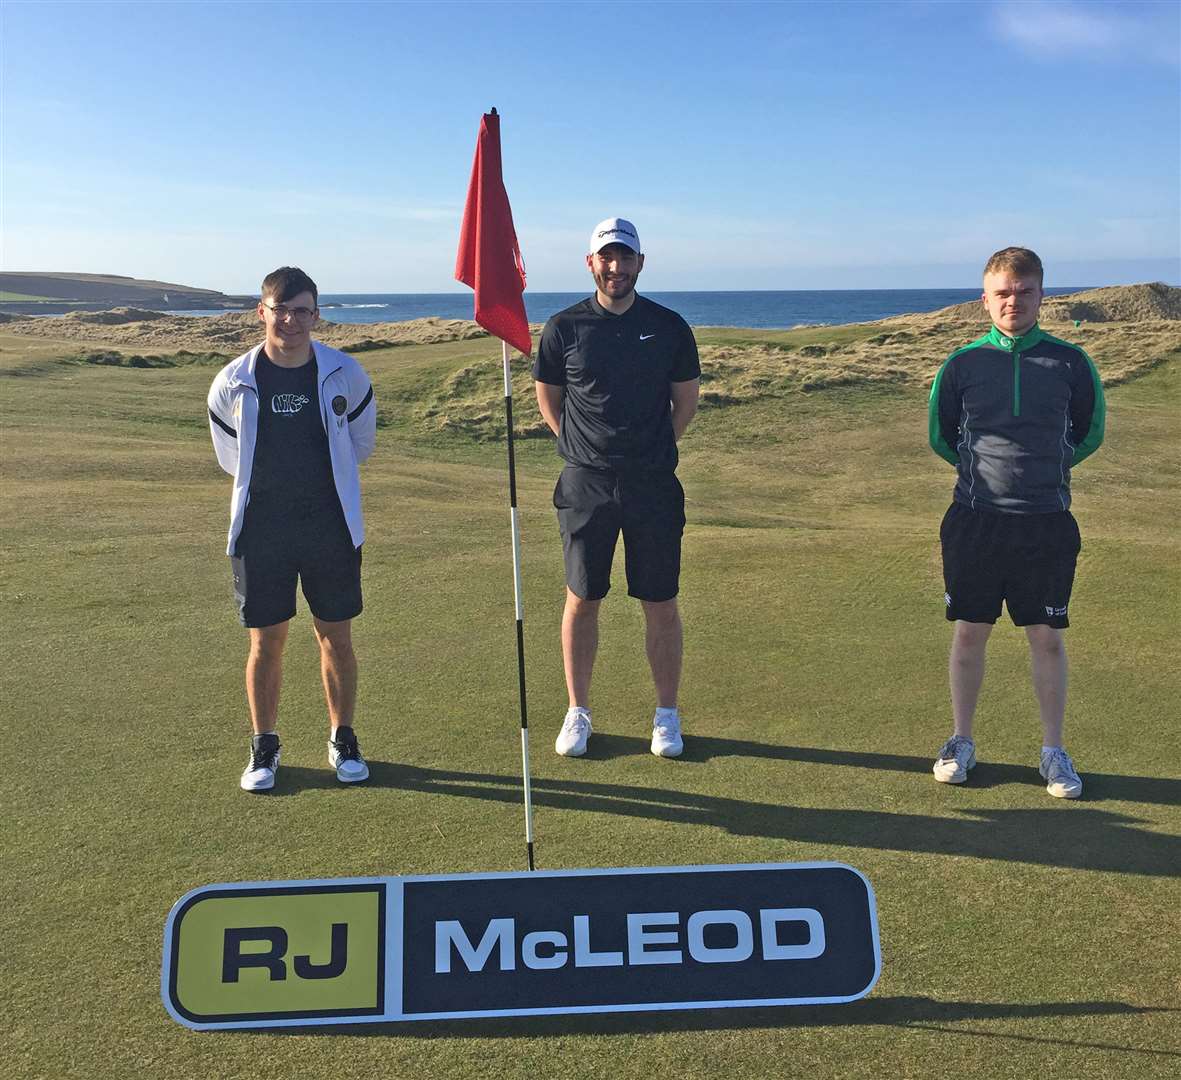 From left: Adam Gunn, Ryan Sutherland and Euan Munro, the winning team from the RJ McLeod Open Scramble at Reay Golf Club.